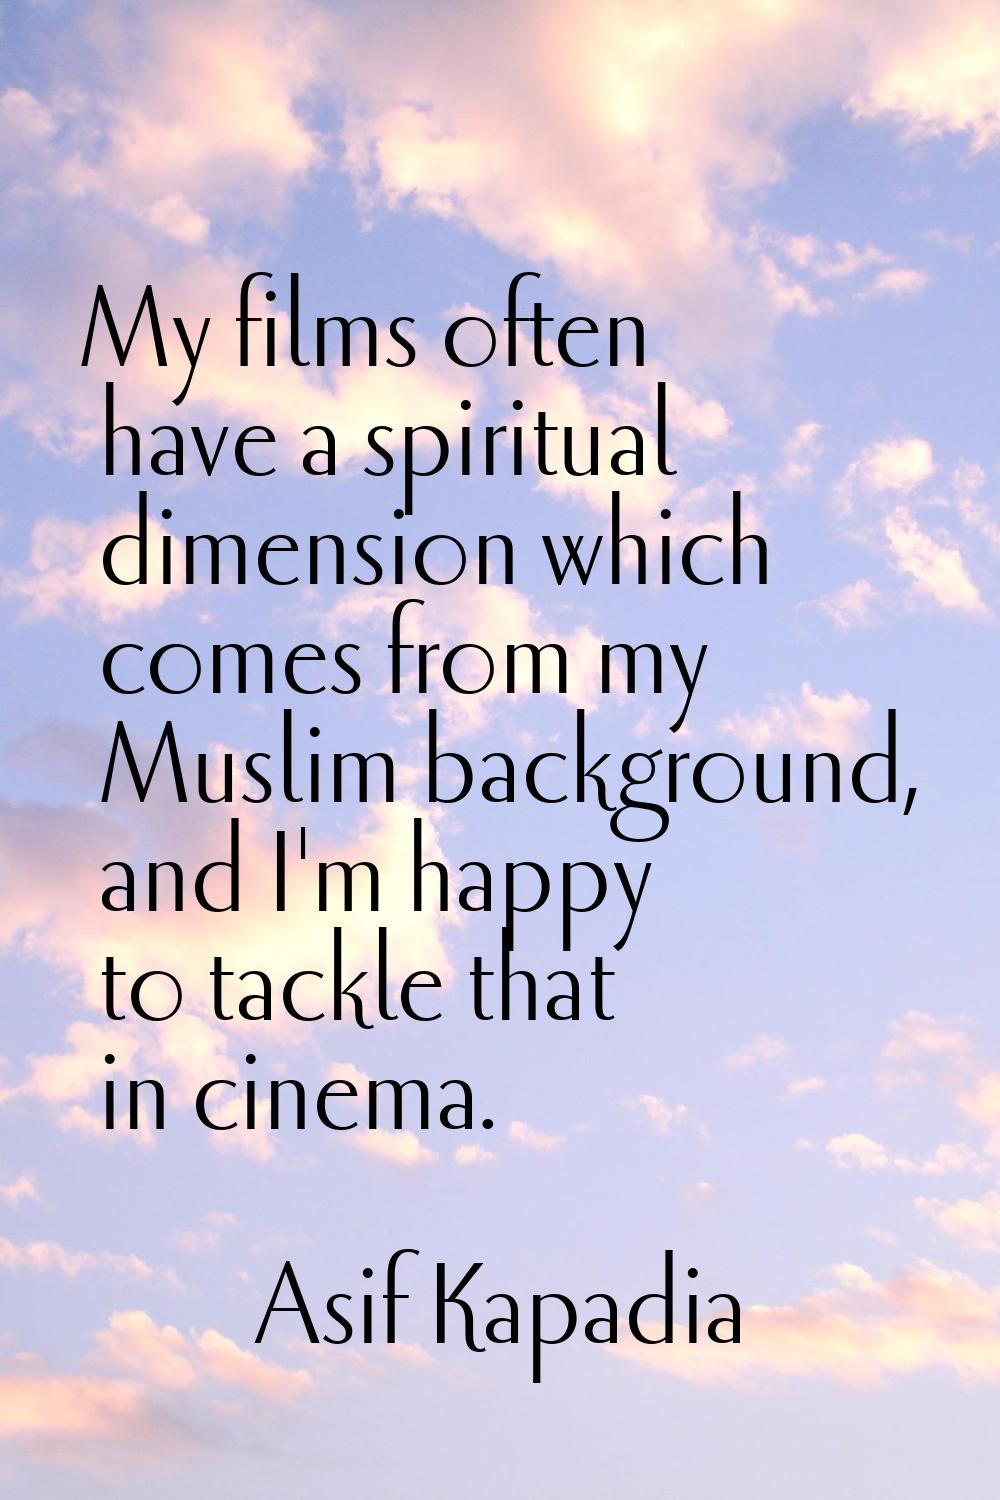 My films often have a spiritual dimension which comes from my Muslim background, and I'm happy to t